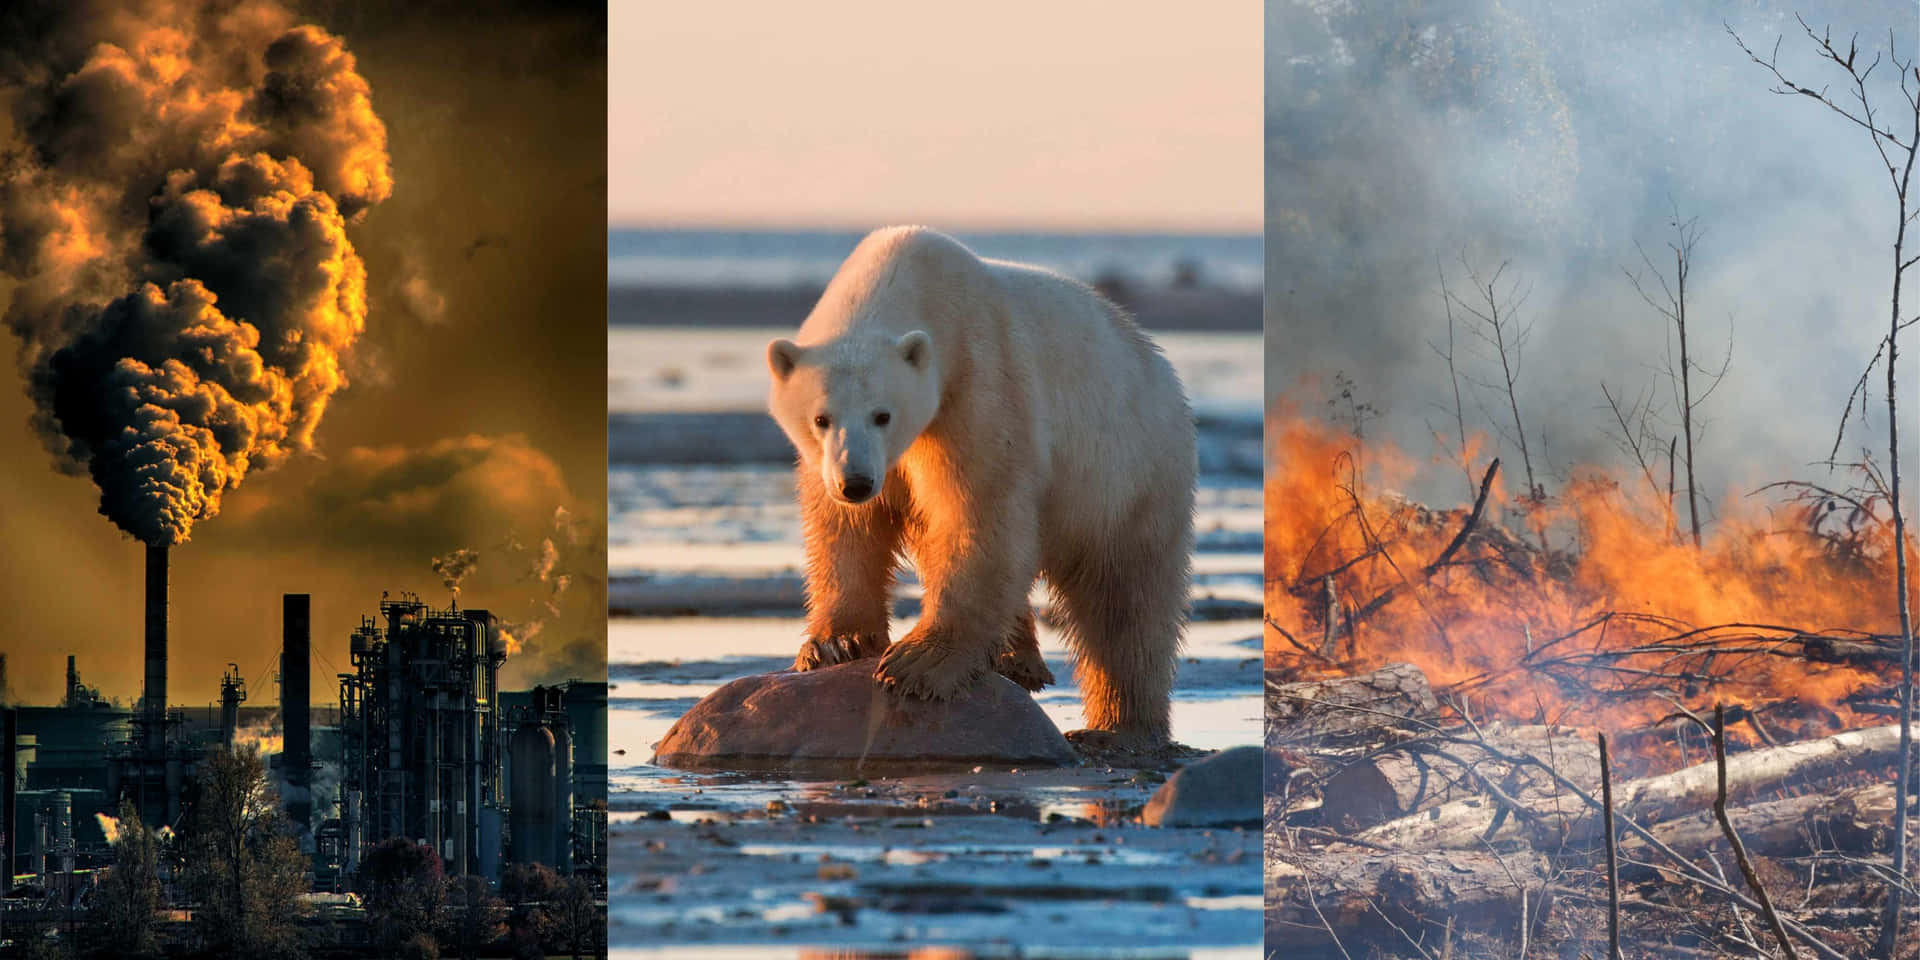 Polar Bears And Smoke From A Fire